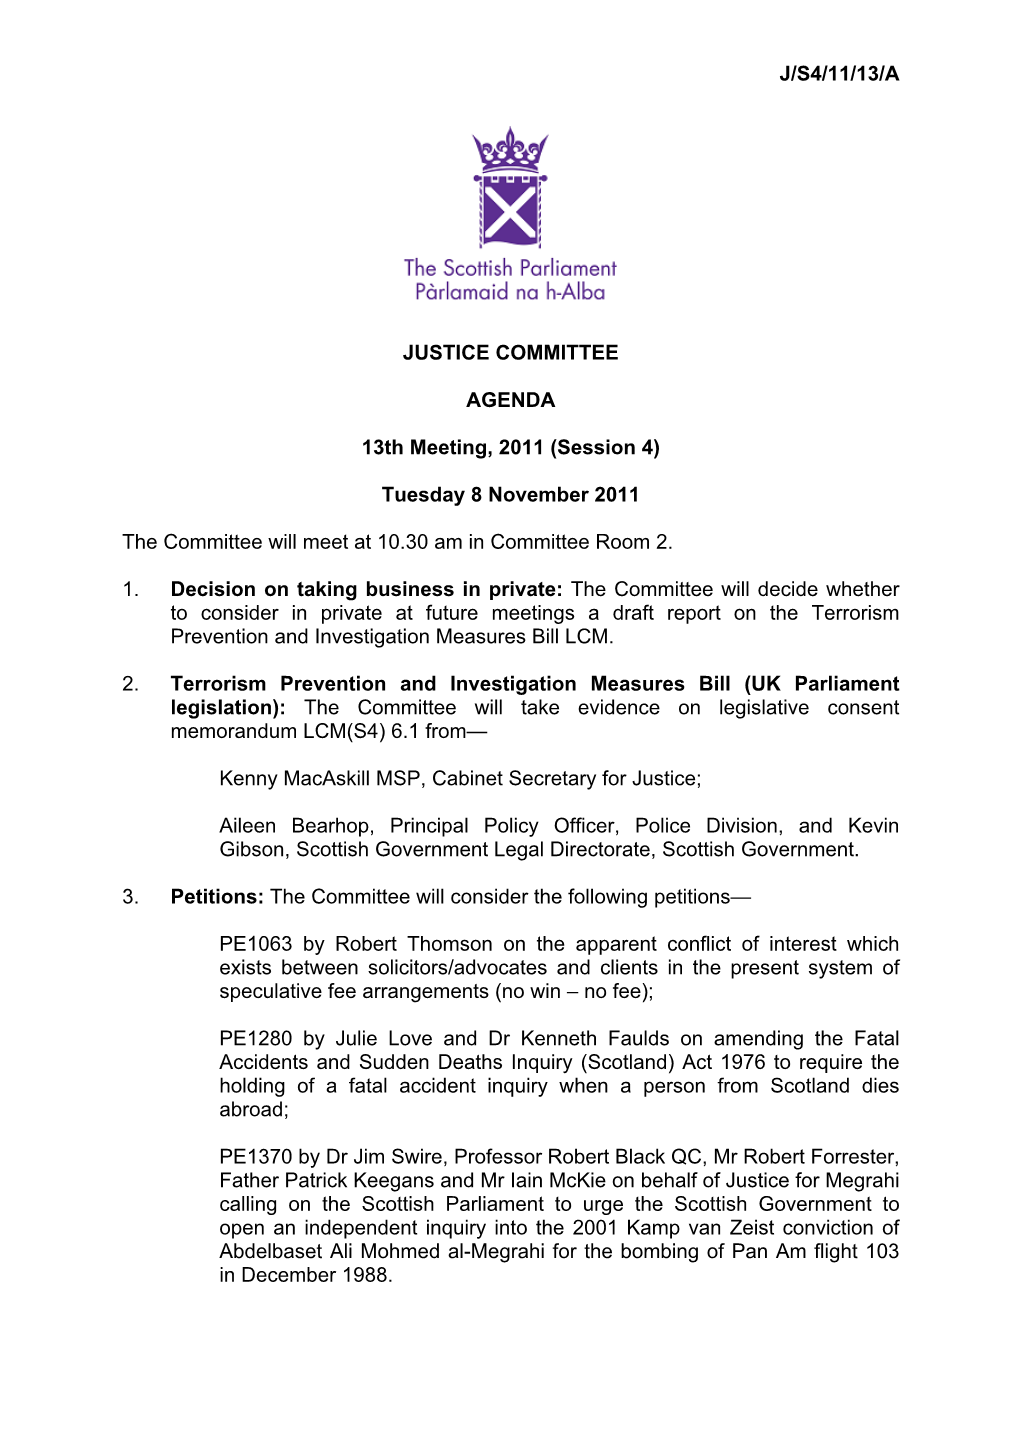 Read the Papers for the Meeting on 8 November 2011